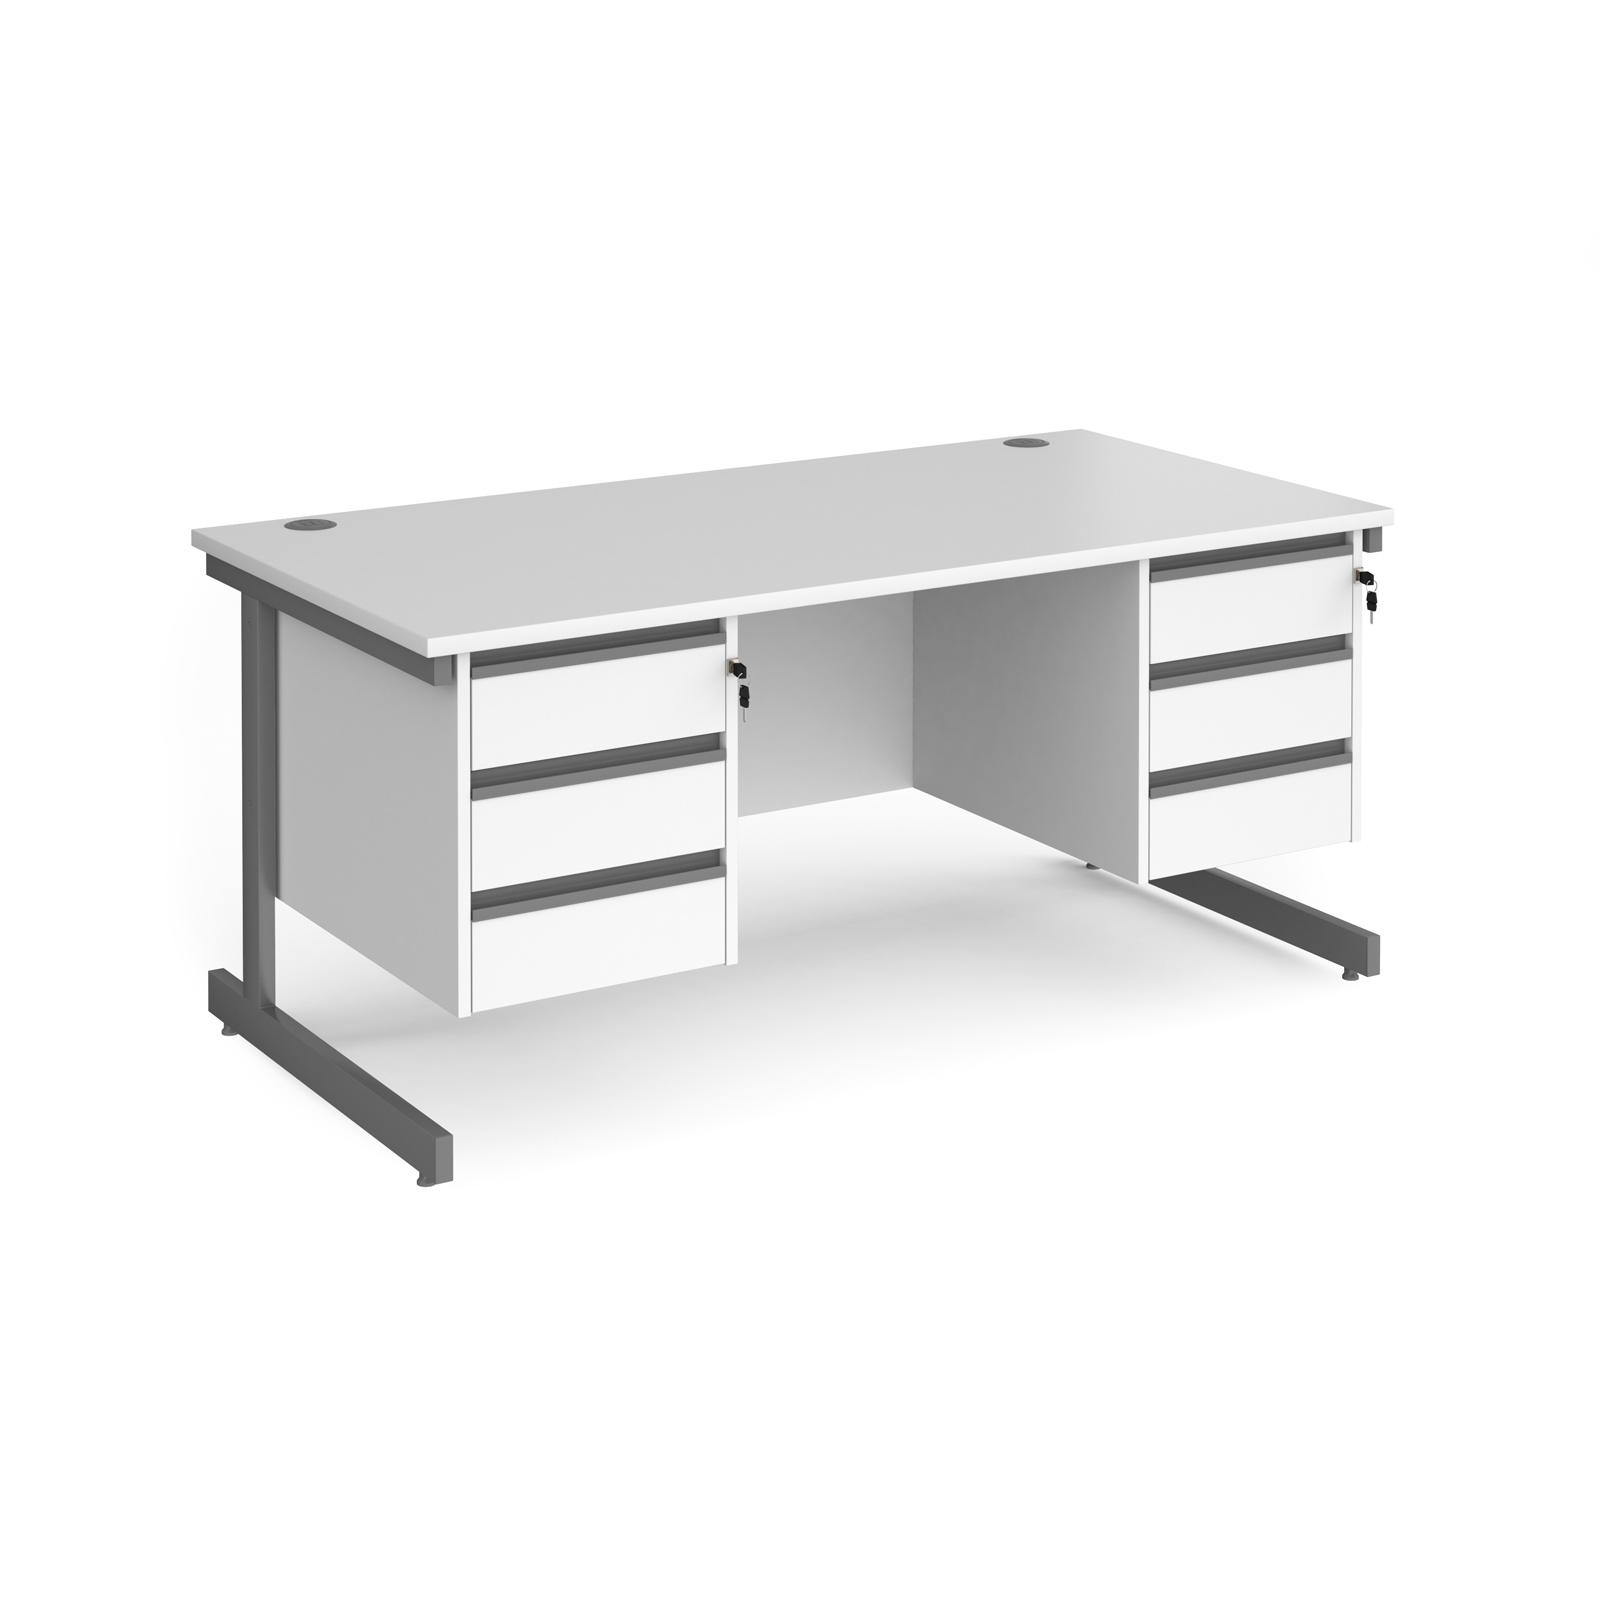 Contract 25 cantilever leg straight desk with 3 and 3 drawer peds